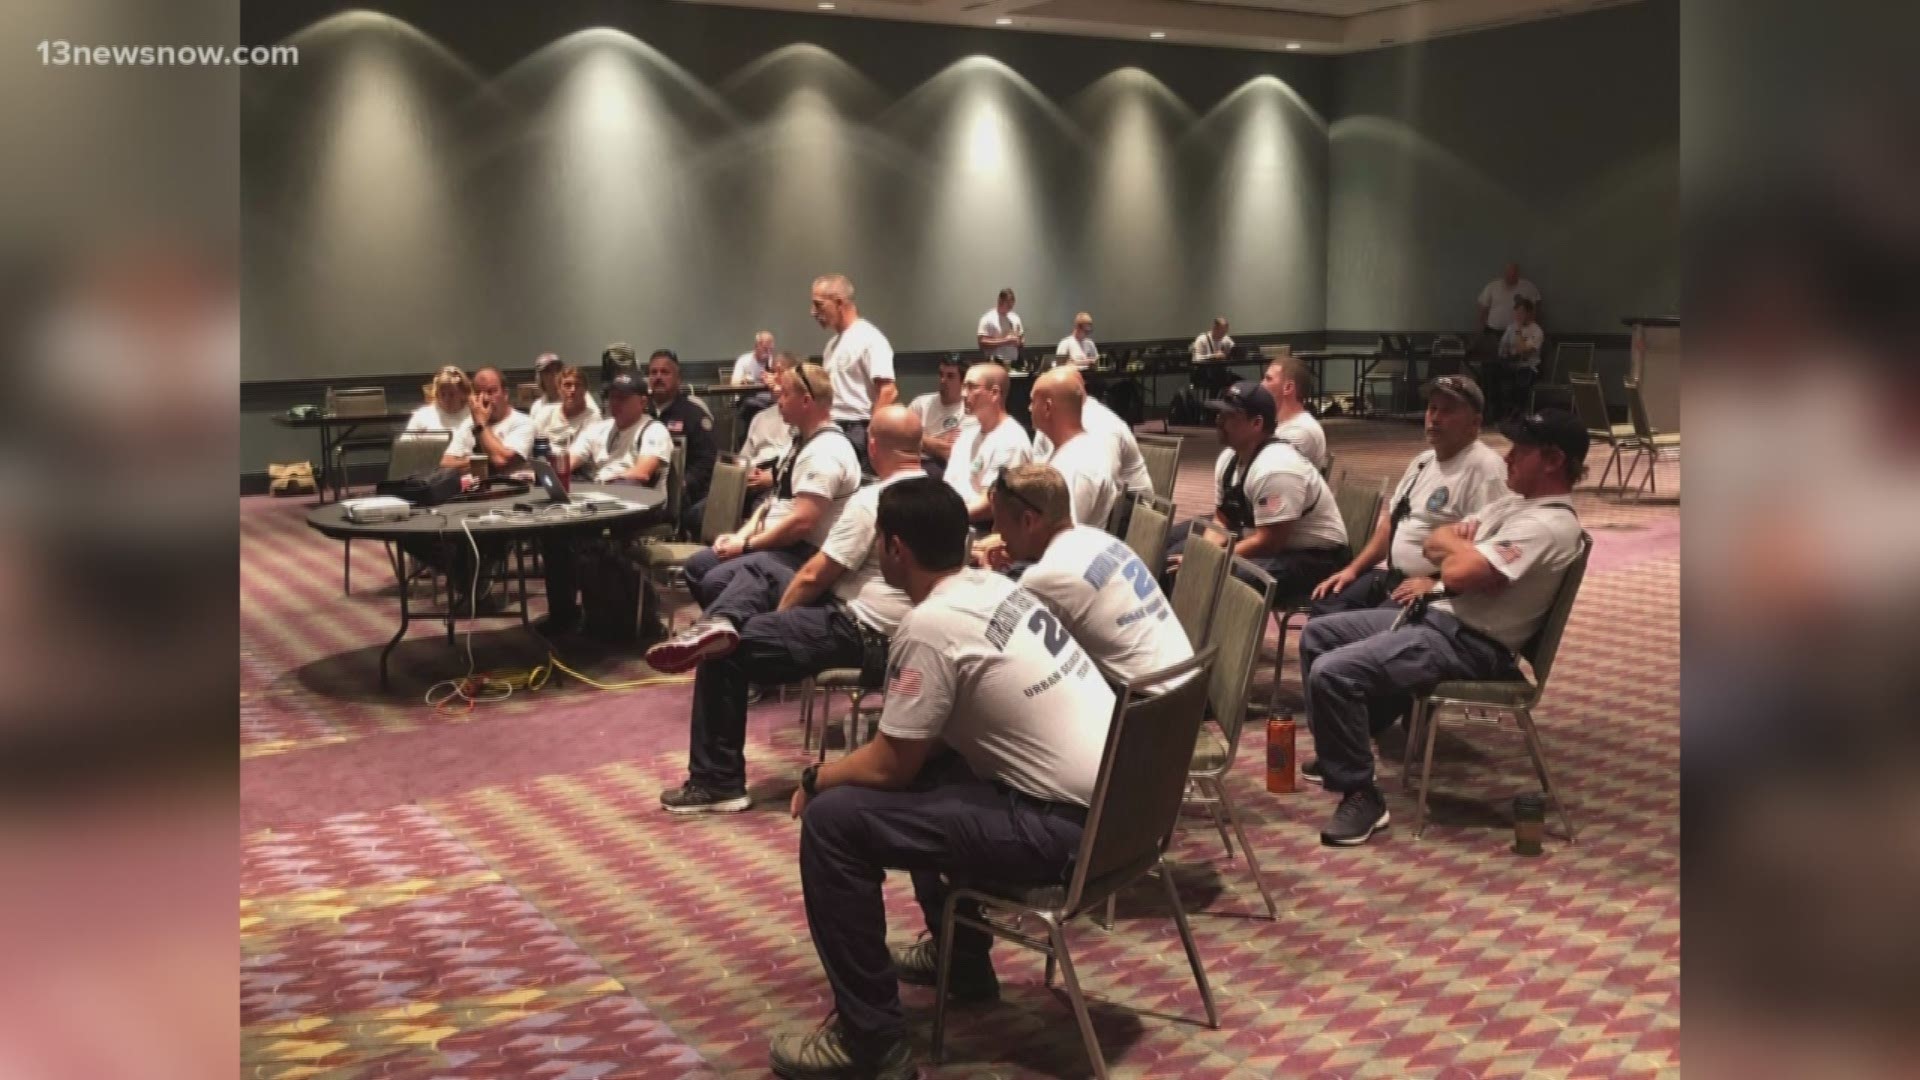 Virginia Task Force 2 is in Flordia preparing for HUrricane Dornia. The Virginia Beach-based force said it was set up at the Convention Center in Orlando, Florida.